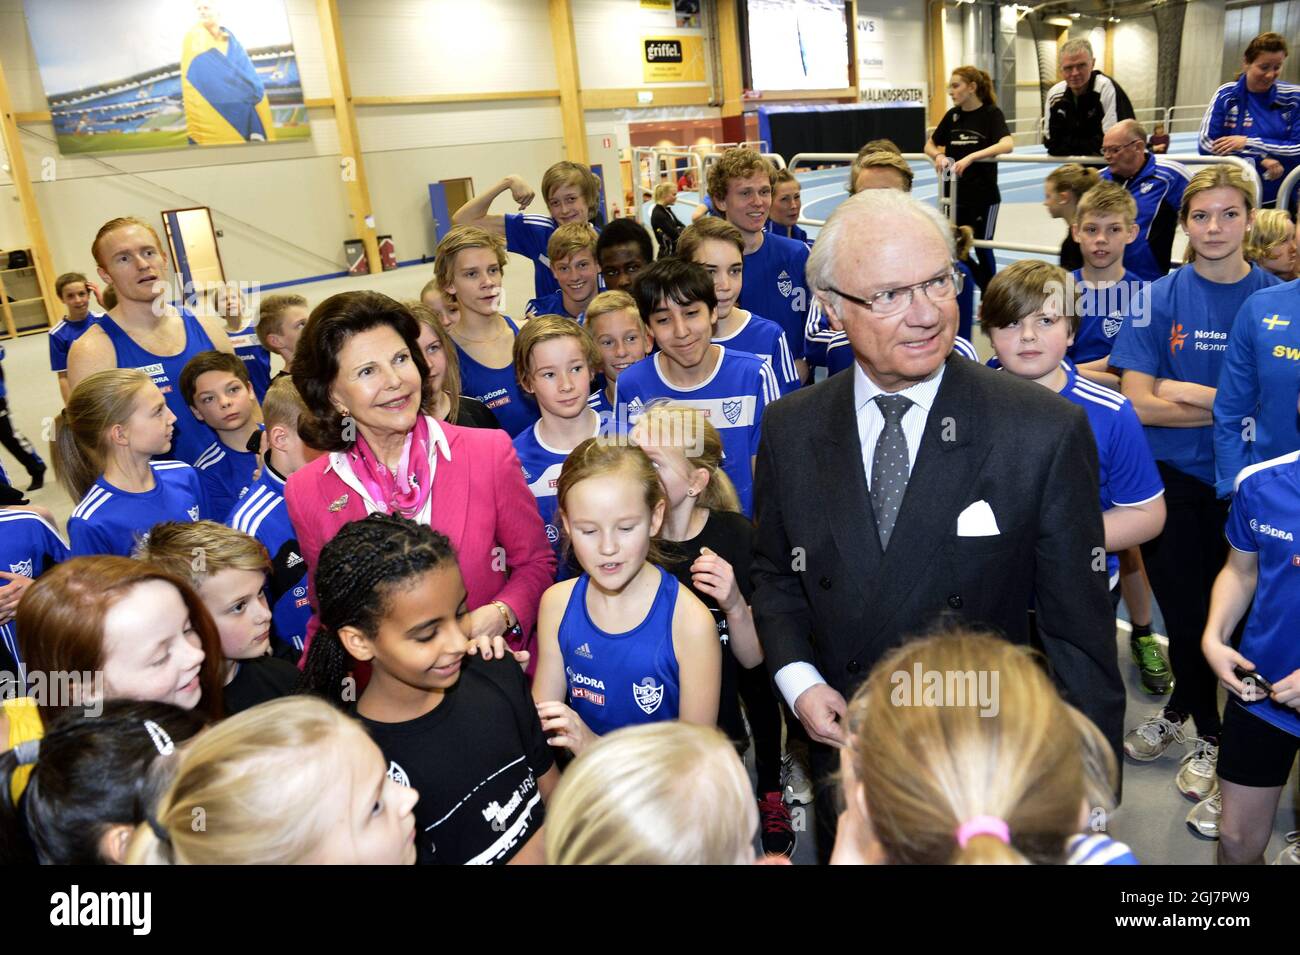 King Carl XVI Gustaf and Queen Silvia of Sweden are surrounded by young athletes during a visit to Vaxjo, Sweden, March 6, 2013.    Stock Photo